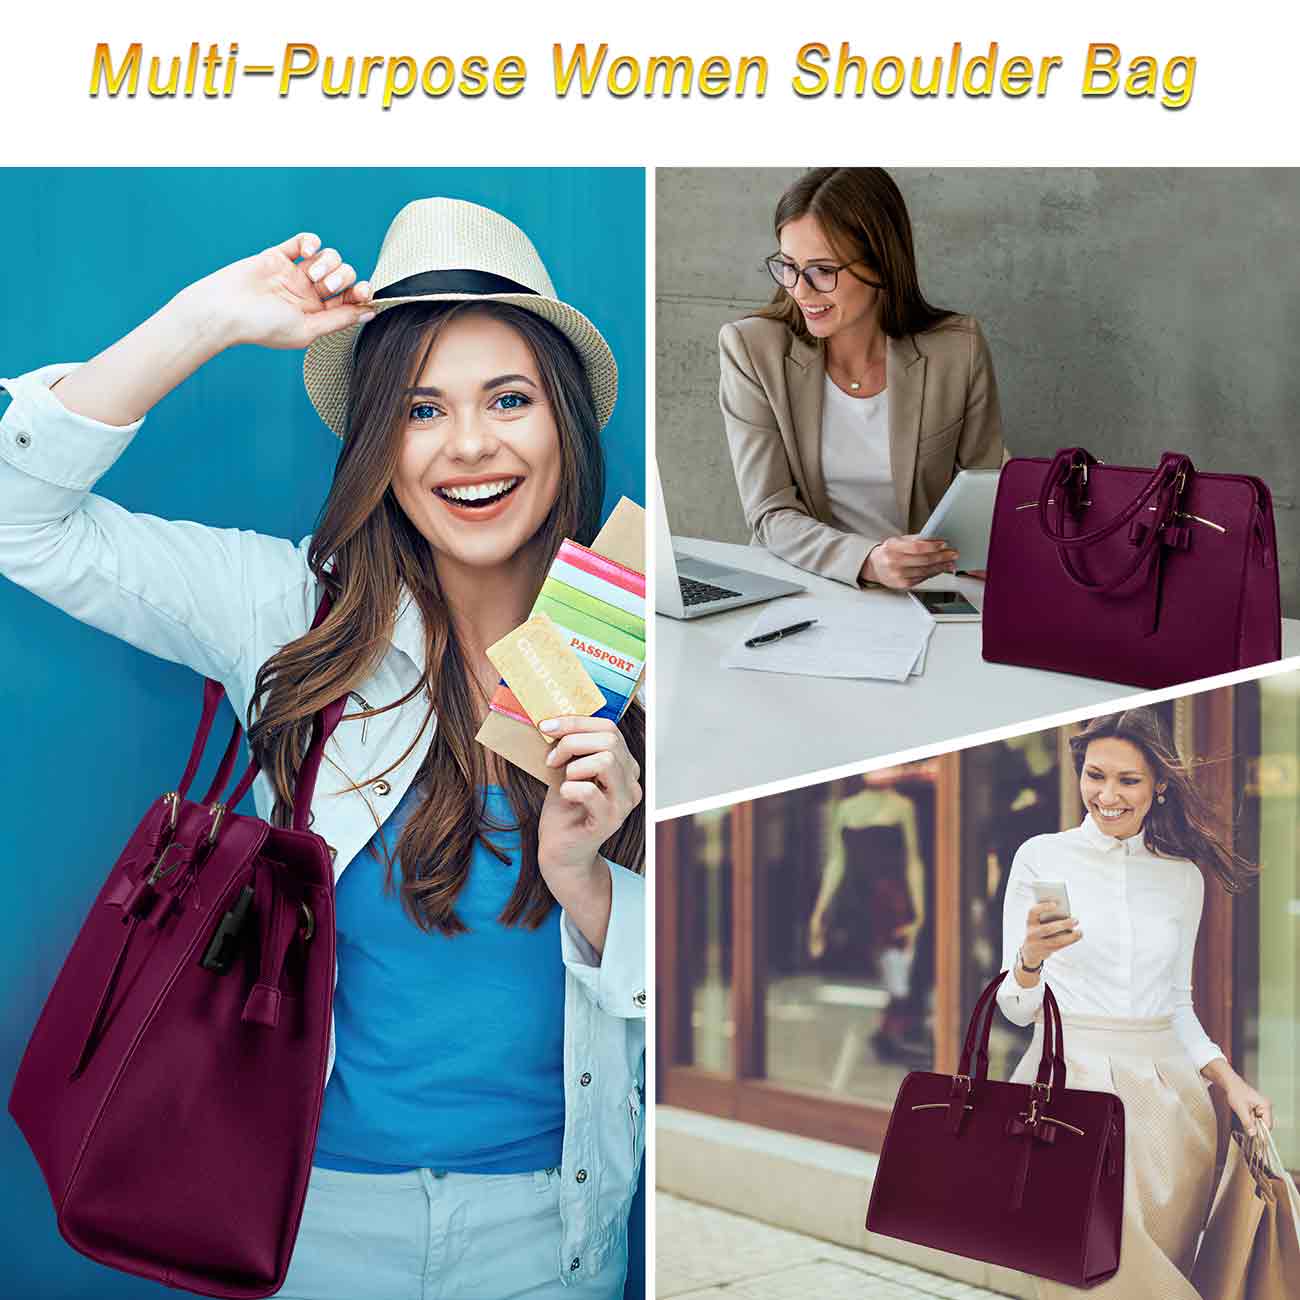 Matein Laptop Tote Bags for Work-Women bag